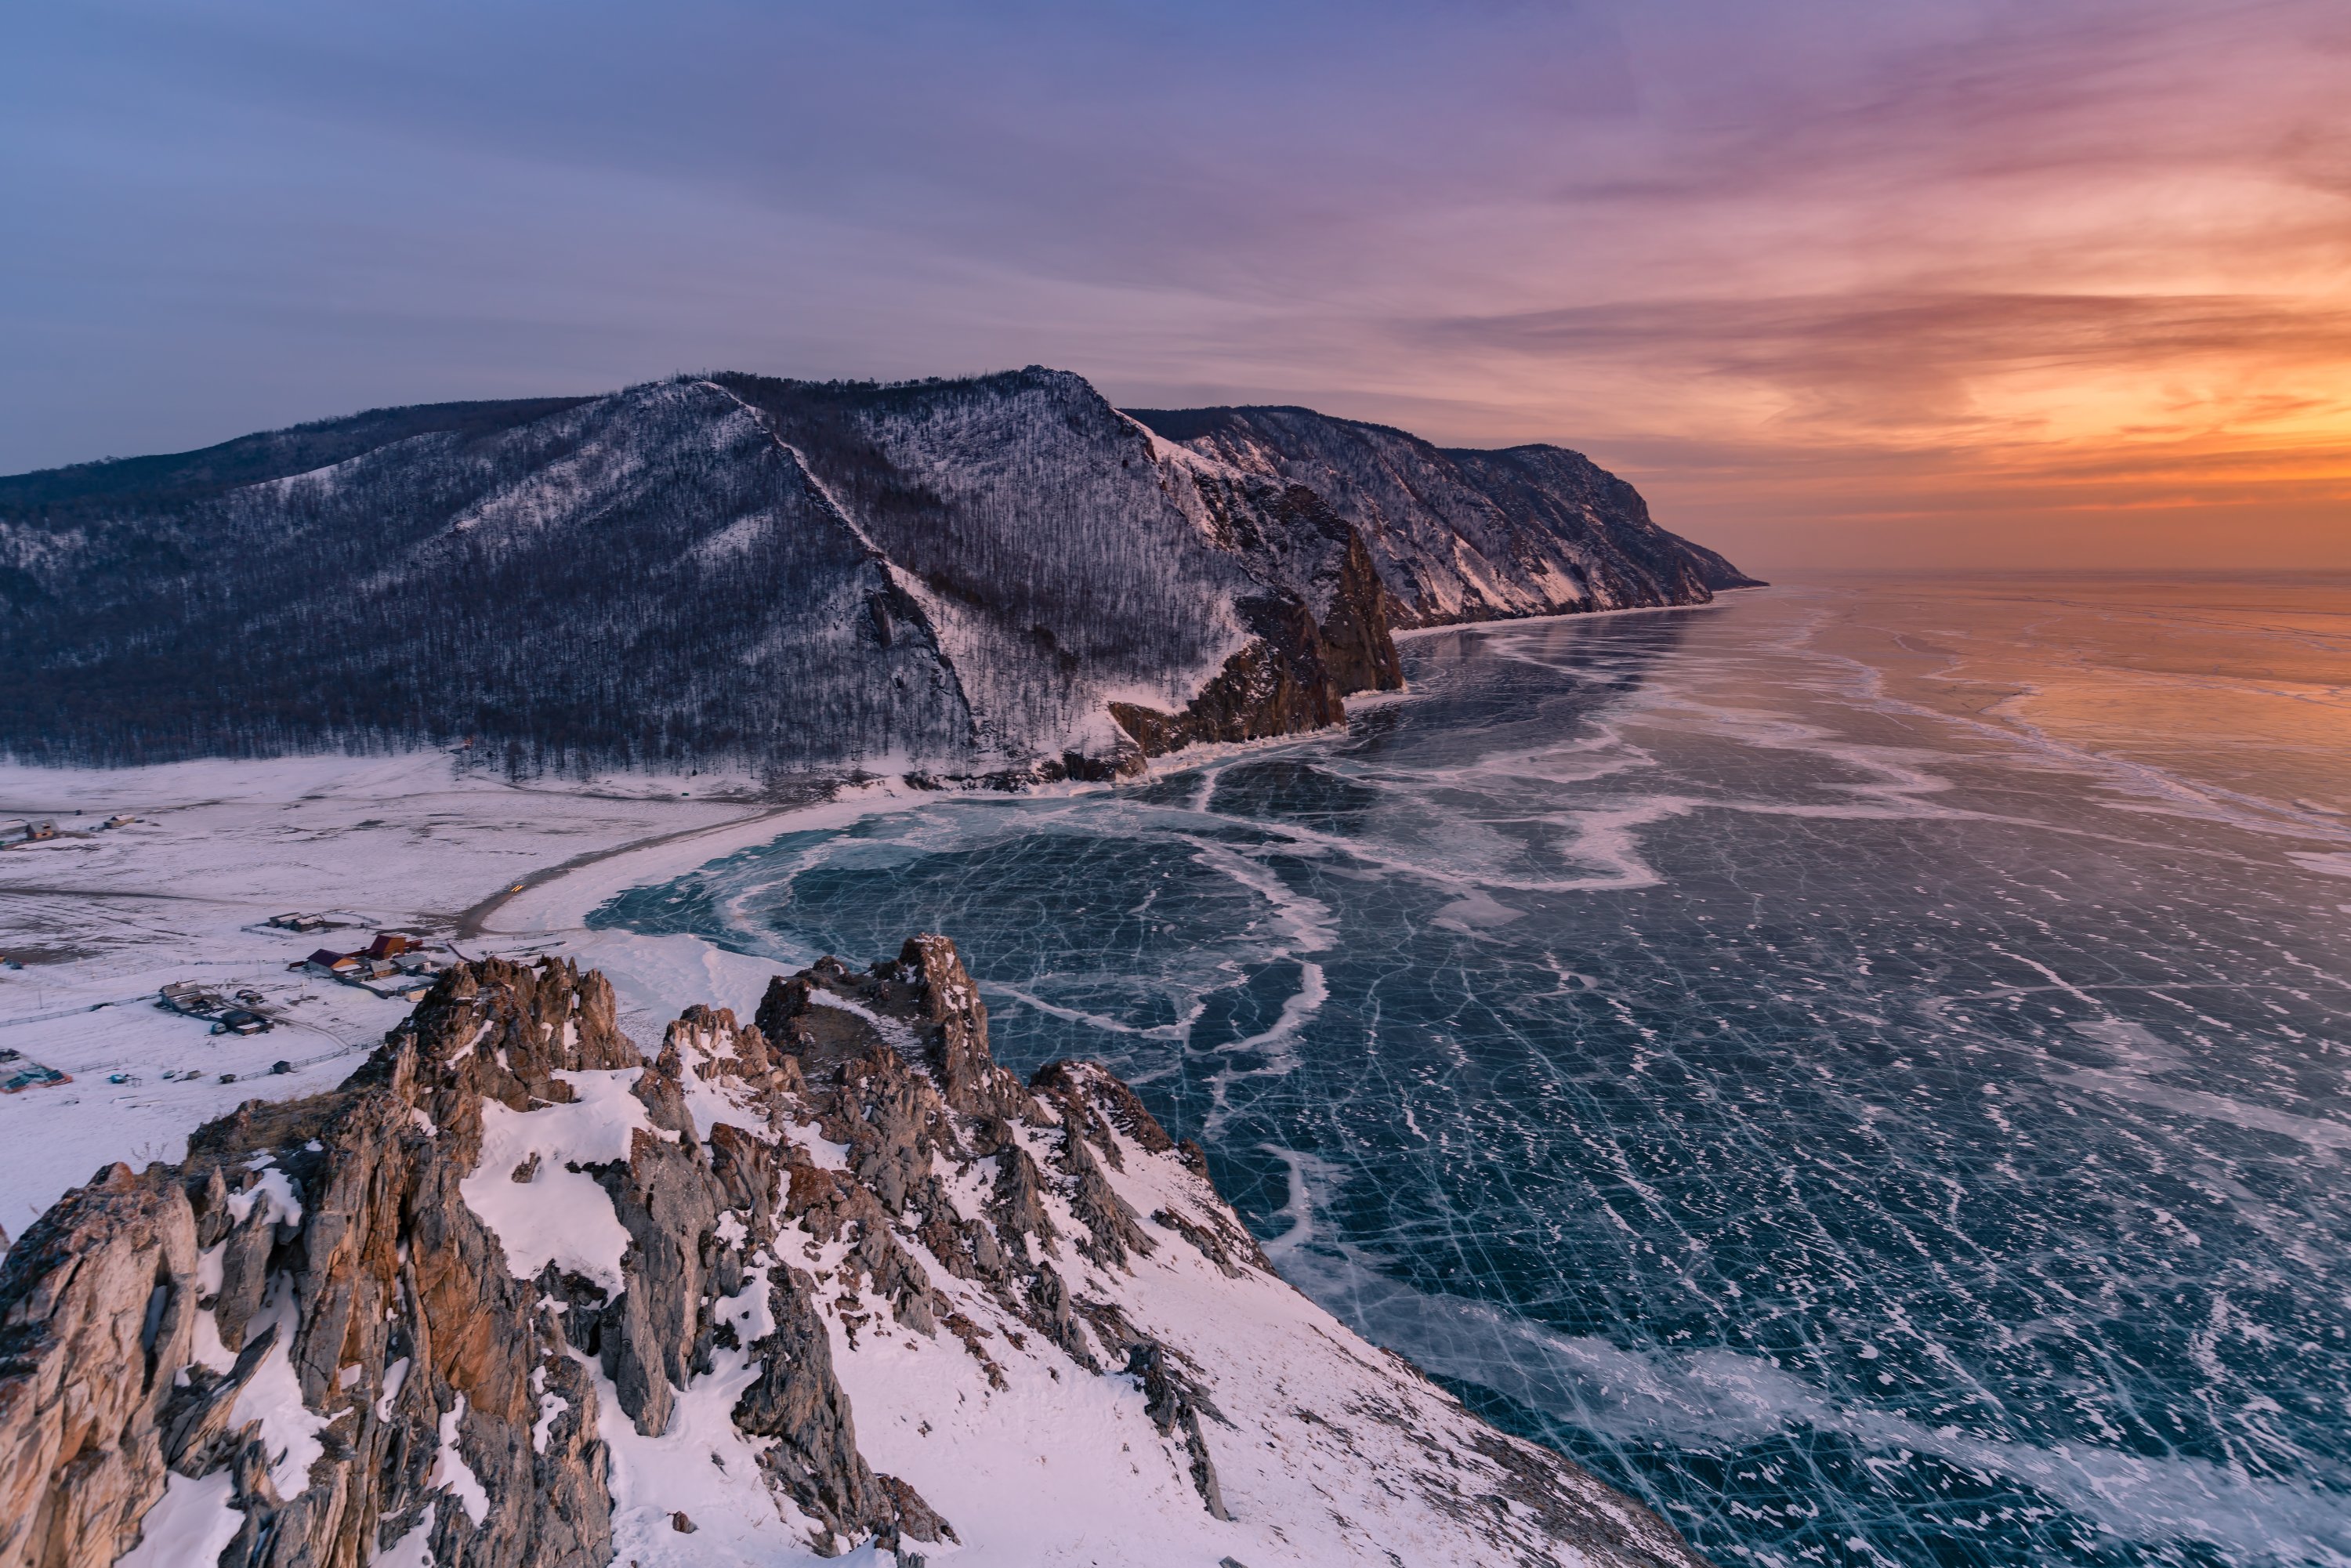 A view from Baikal Lake in the winter, Russia. (Shutterstock)